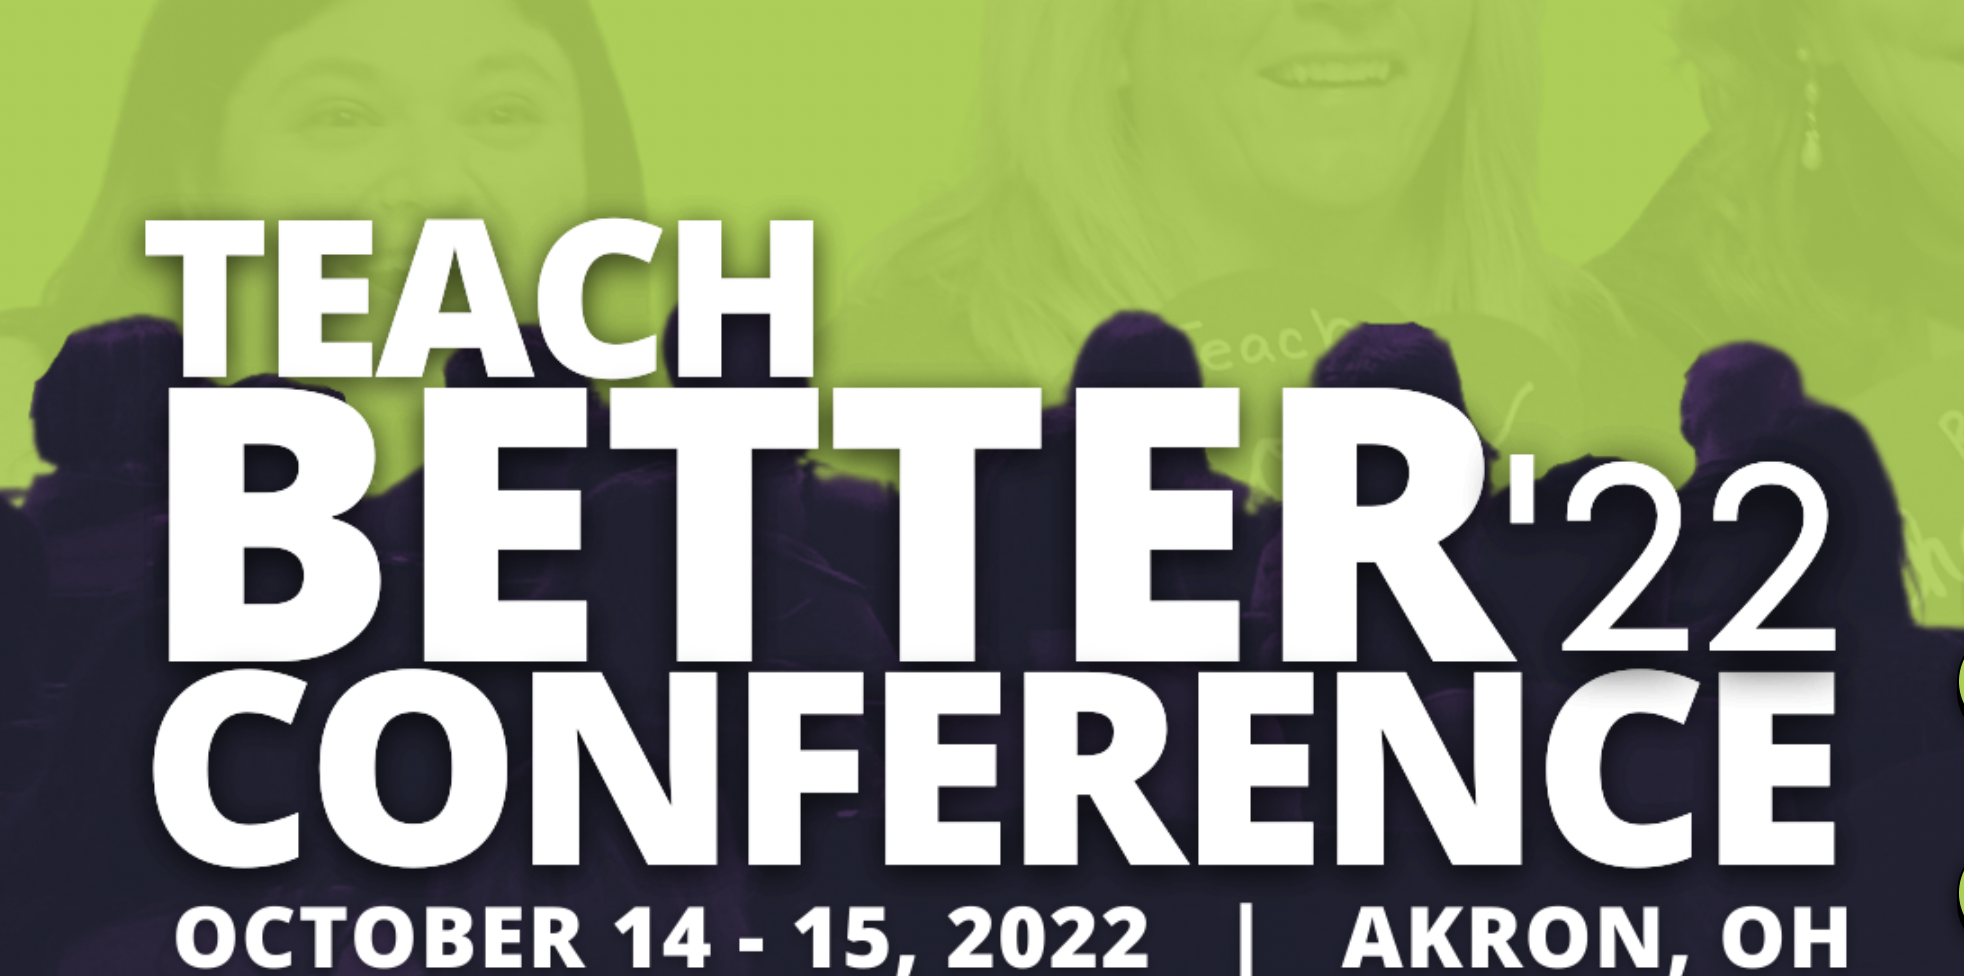 Qwickly Sponsors the 2022 Teach Better Conference in Akron, Ohio!